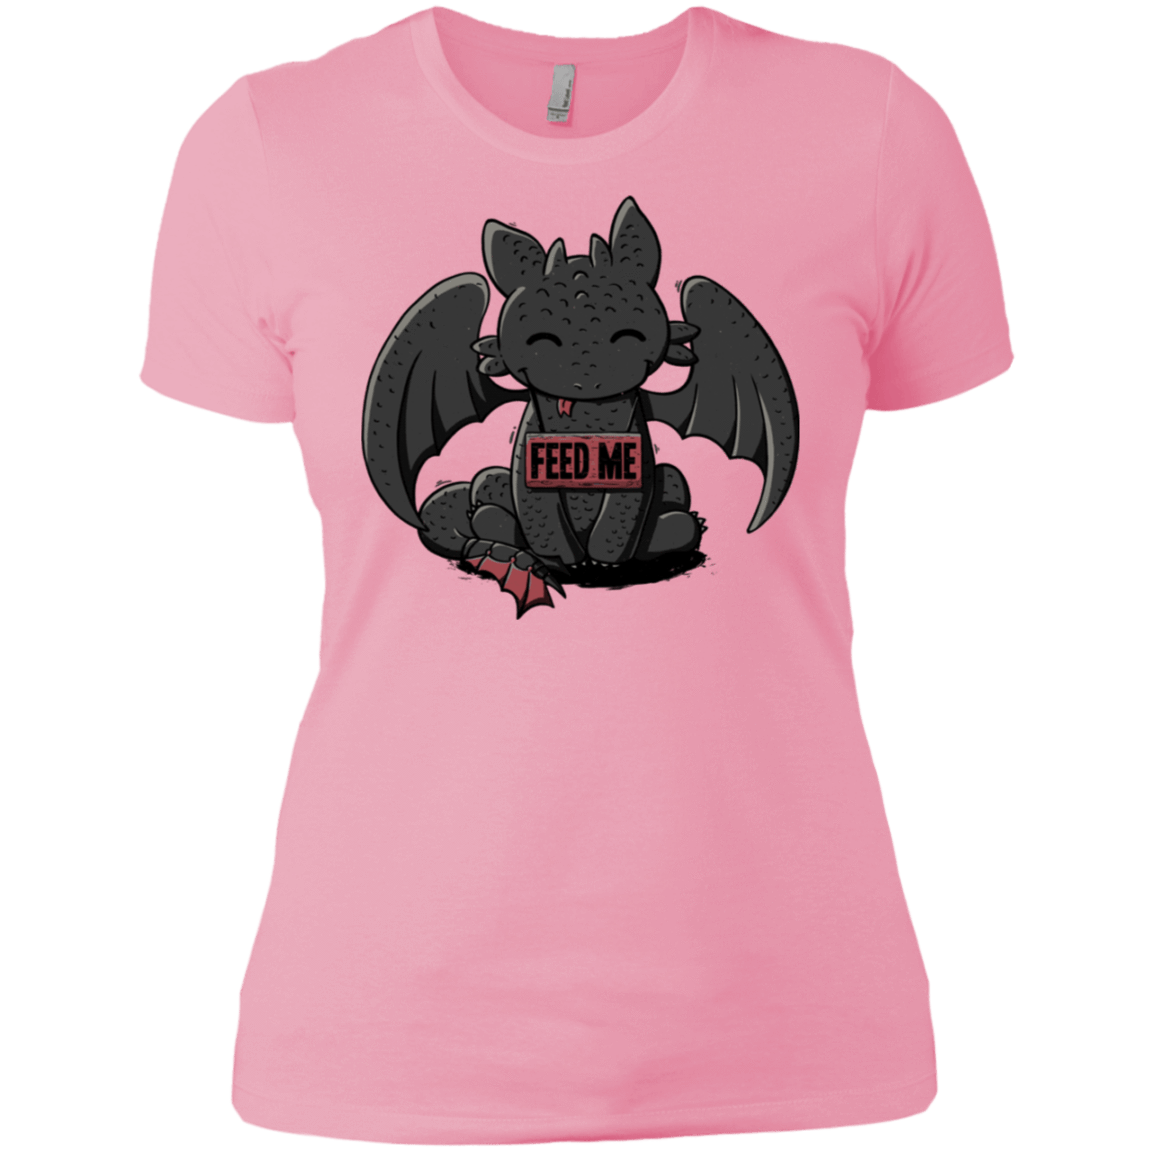 T-Shirts Light Pink / X-Small Toothless Feed Me Women's Premium T-Shirt